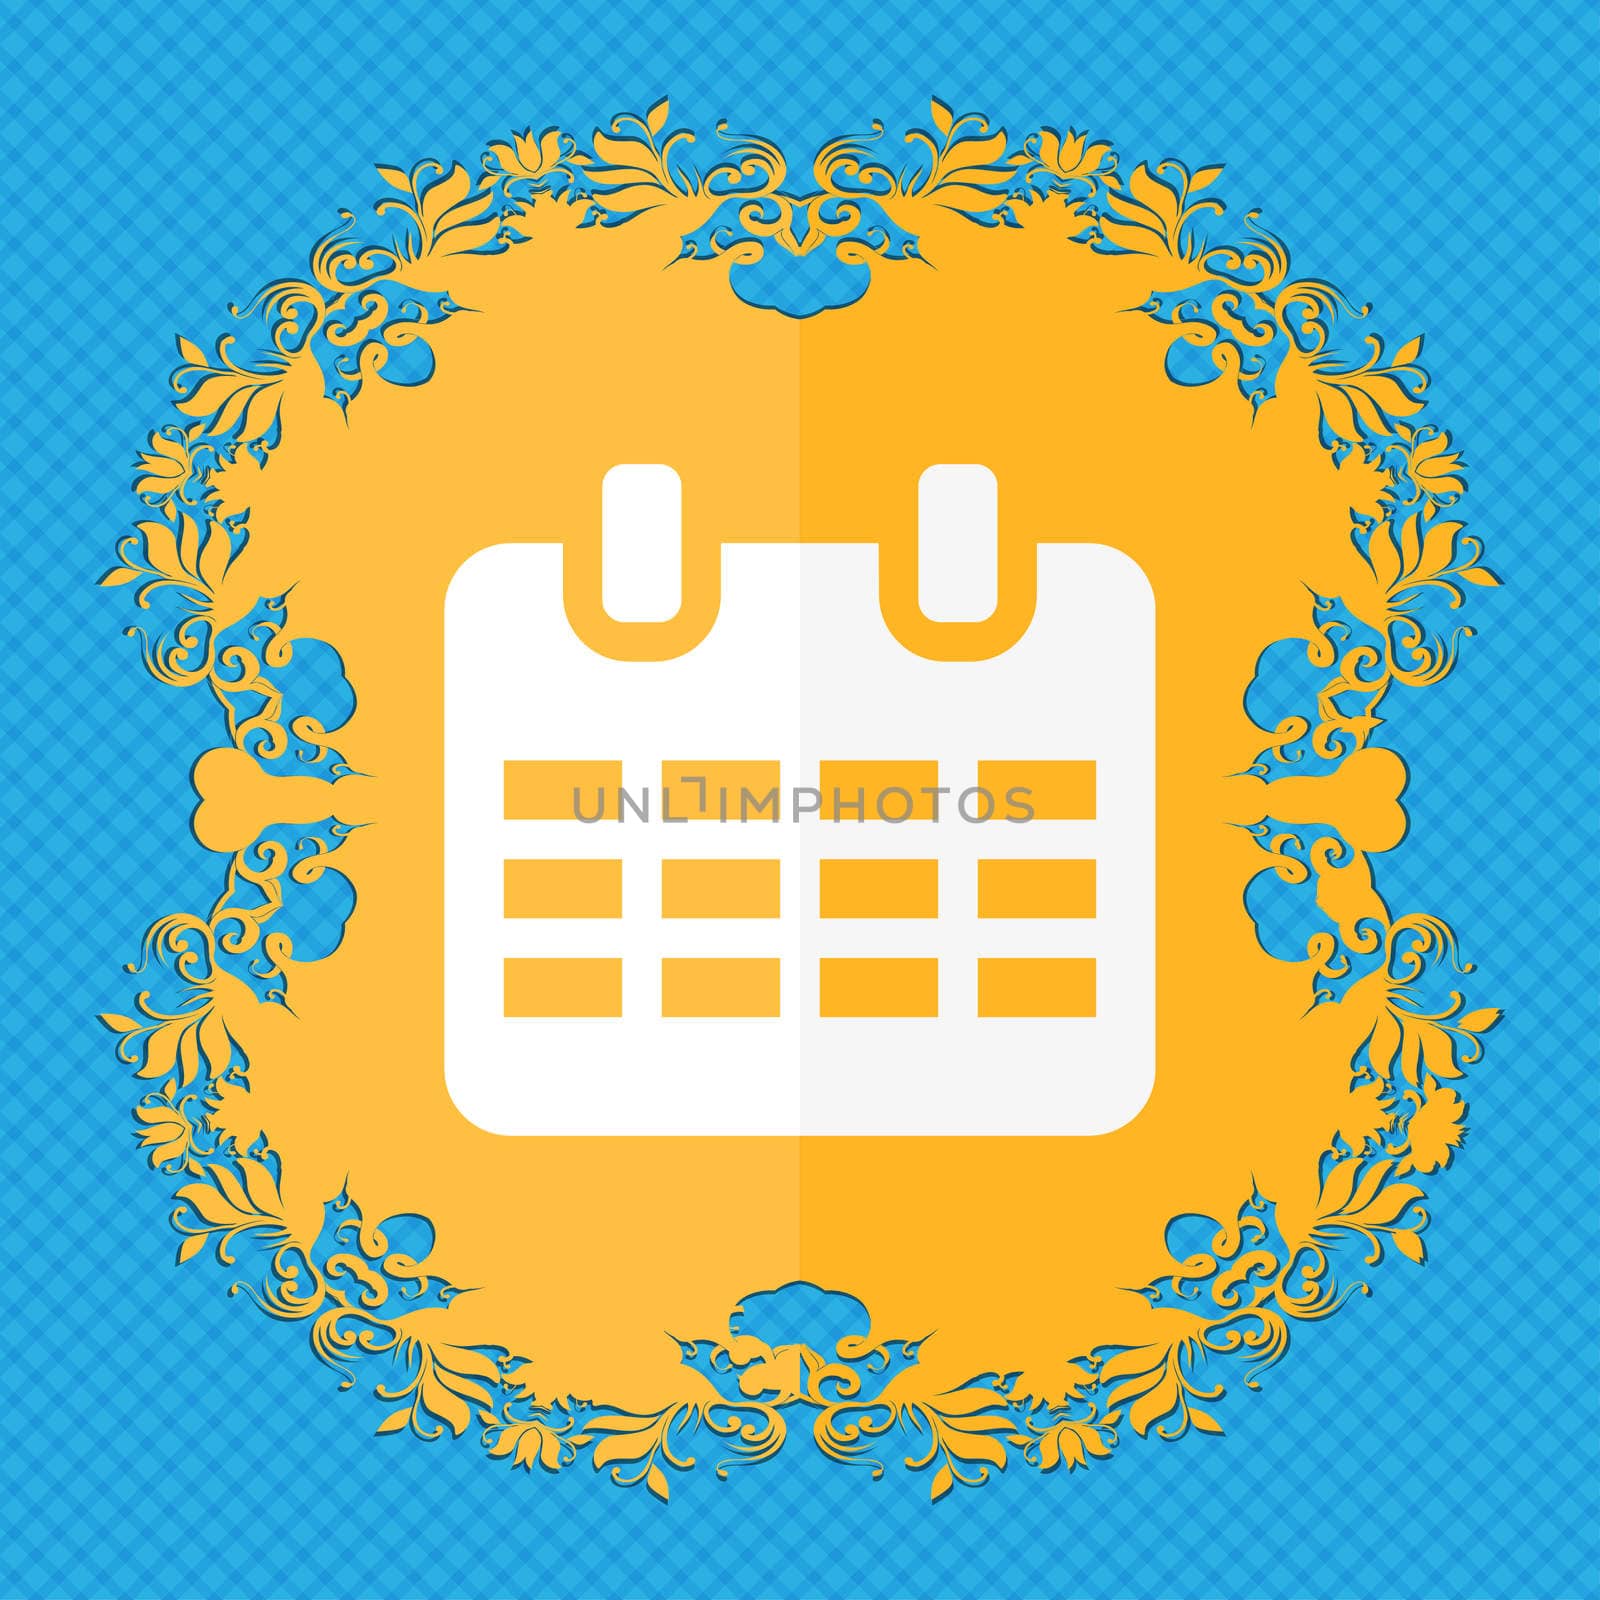  Calendar, Date or event reminder . Floral flat design on a blue abstract background with place for your text.  by serhii_lohvyniuk